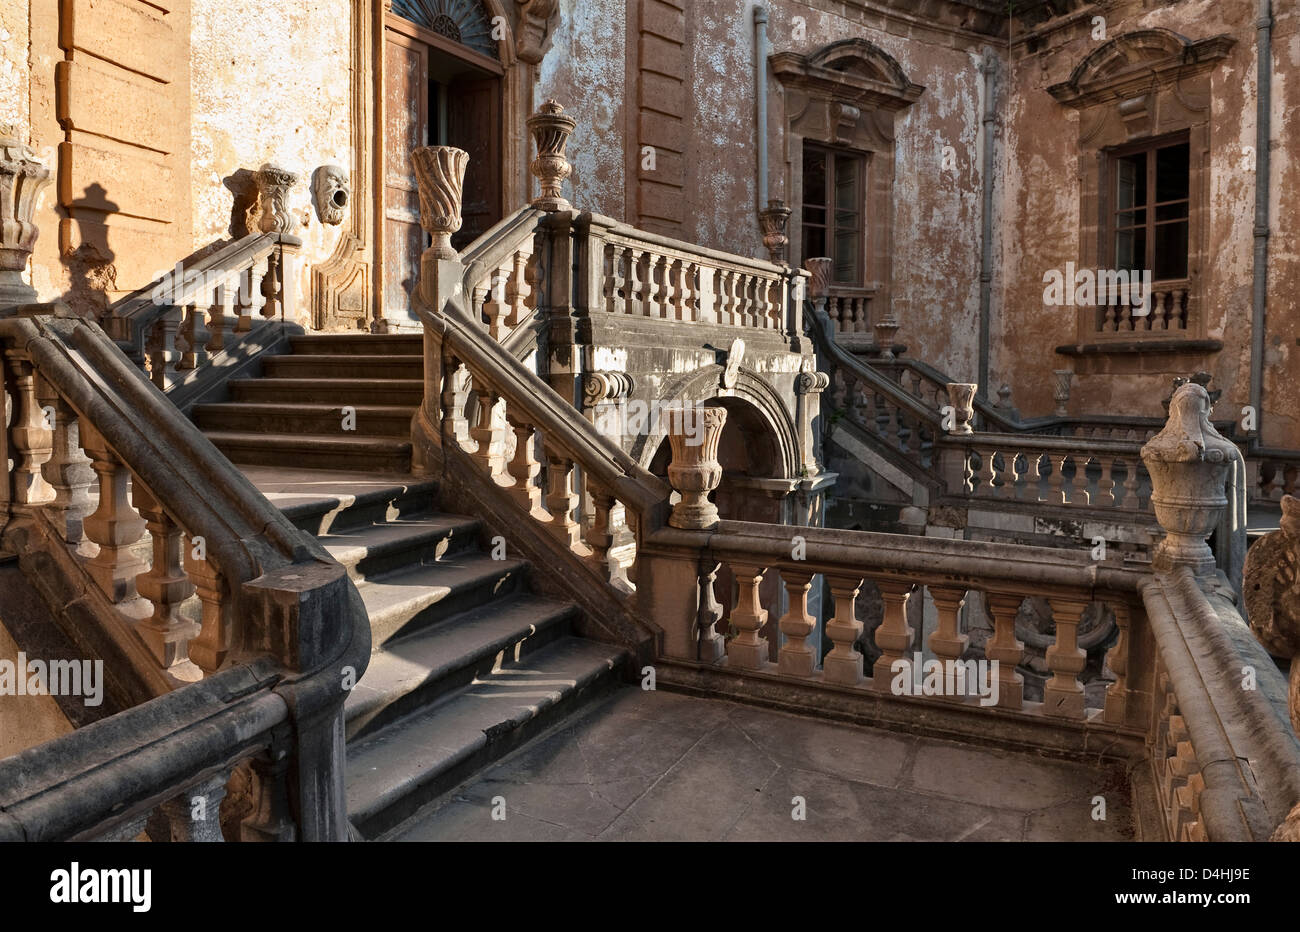 The Baroque Villa Palagonia in Bagheria, Palermo, Sicily, Italy, was built in 1715 and is famous for its many grotesque statues of dwarfs and monsters Stock Photo